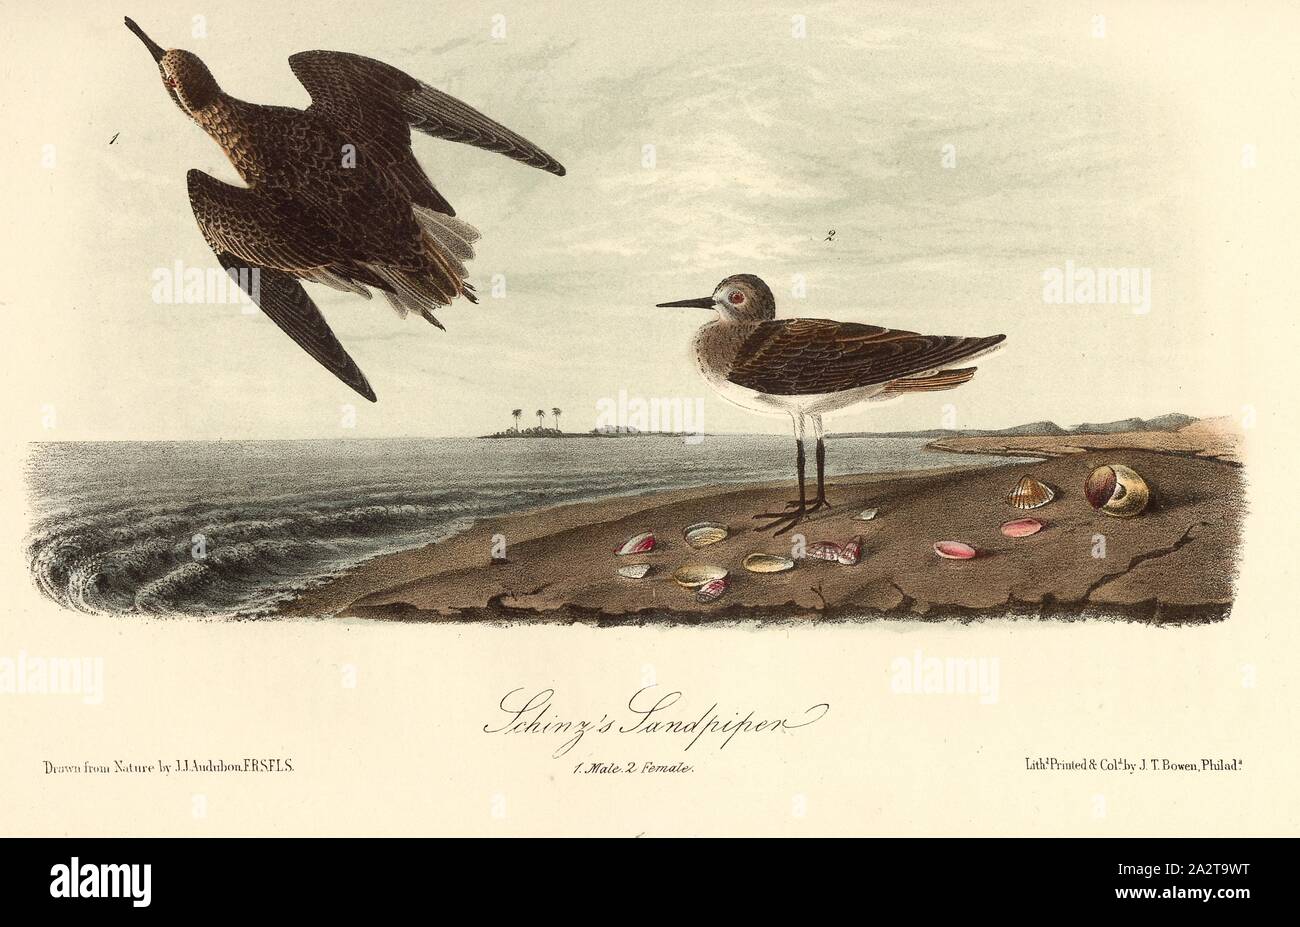 Schinz's Sandpiper, Woodcock (Tringa Schinzii), Signed: J.J. Audubon, J.T. Bowen, lithograph, Pl. 335 (Vol. 5), Audubon, John James (drawn); Bowen, J. T. (lith.), 1856, John James Audubon: The birds of America: from drawings made in the United States and their territories. New York: Audubon, 1856 Stock Photo